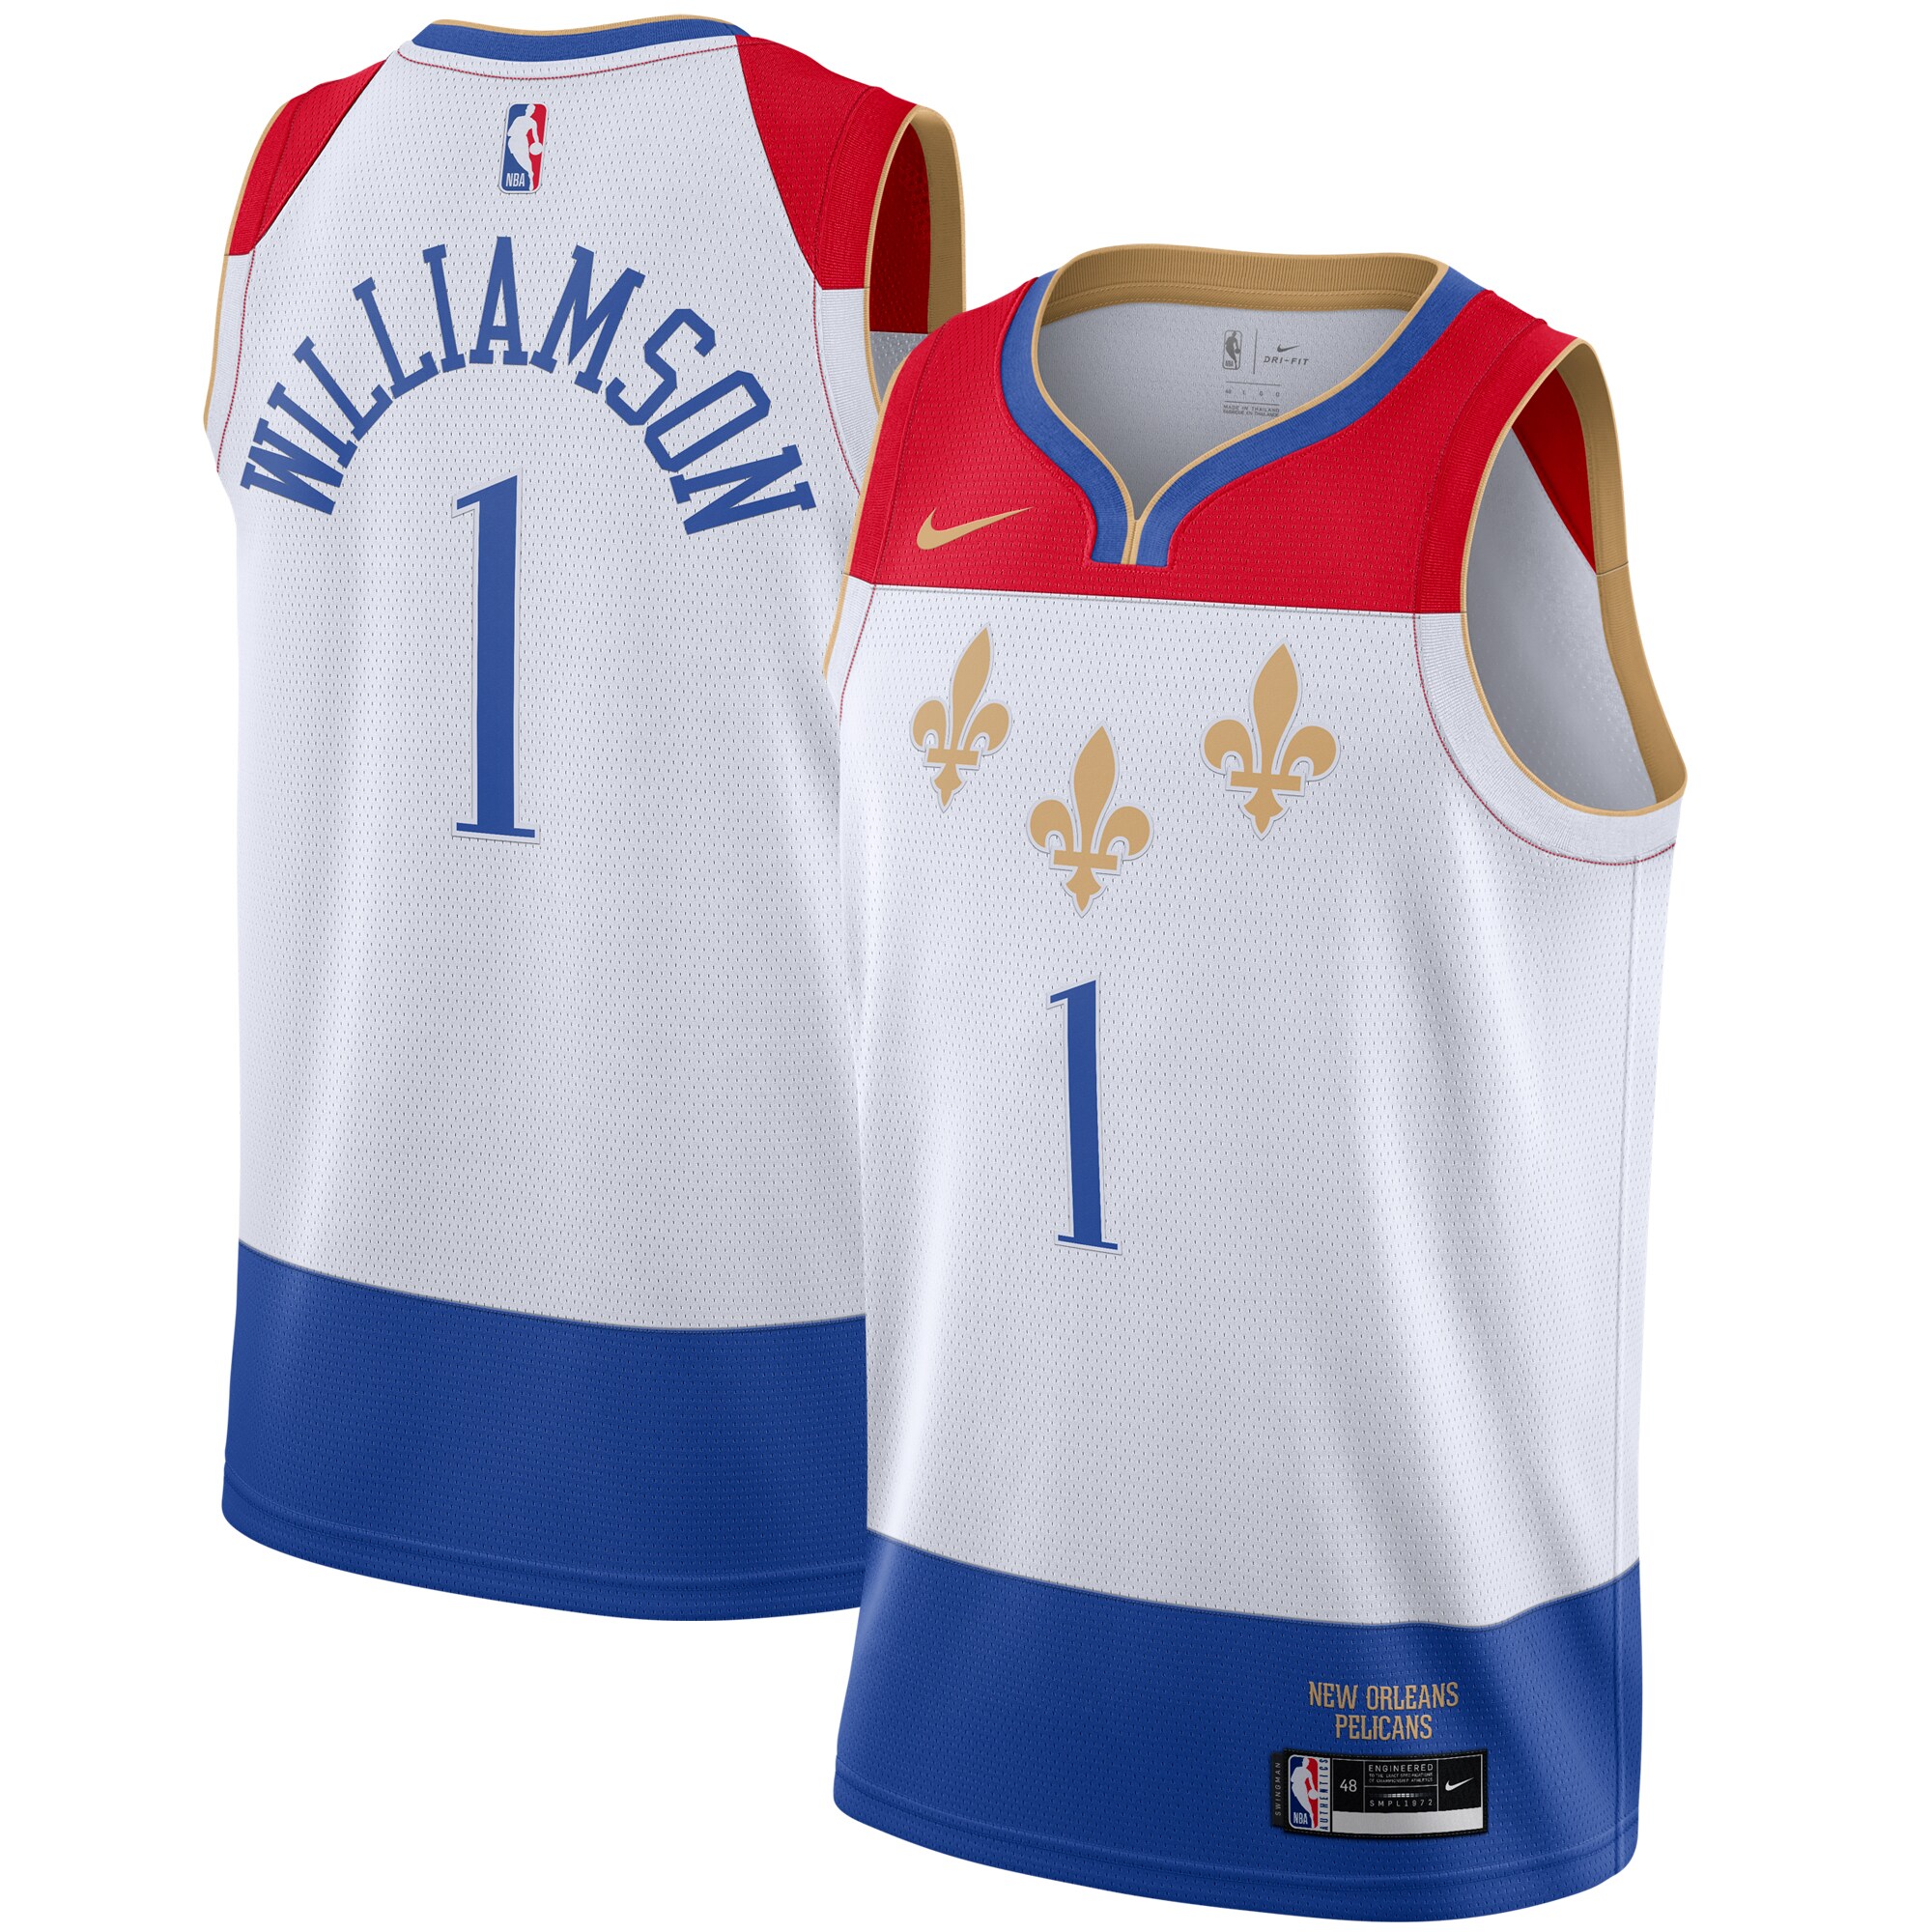 Obzhgw6 - New Orleans Pelicans Concept Jerseys PNG Image